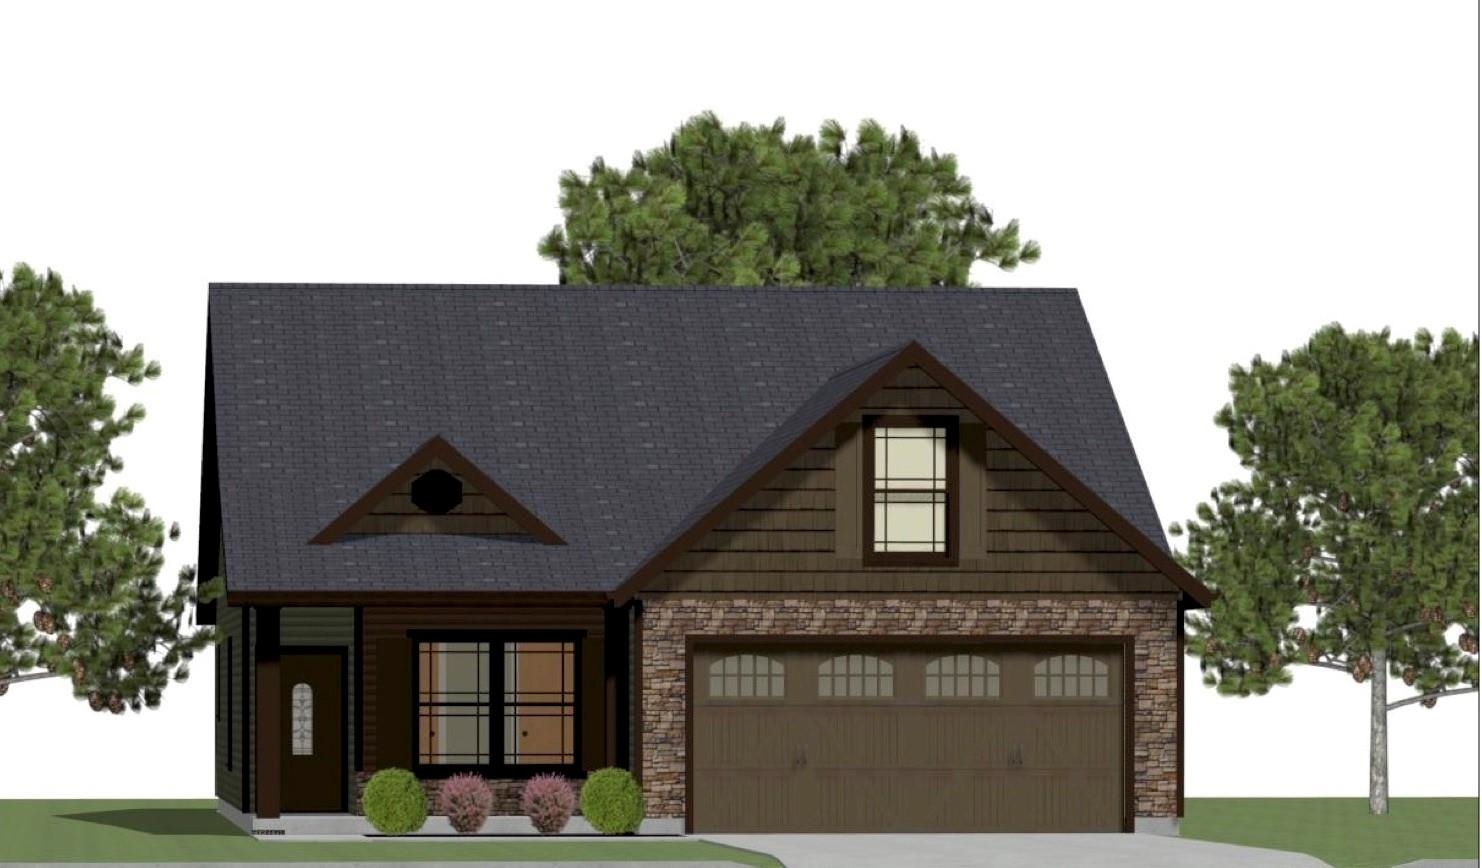 This is the CLIFTON floorplan. 3 bedroom/2 bathrooms, trey ceiling with rope lighting in master bedroom, 12x12 back patio. Located in the NEW Elliott park community in Lyman just minutes from Spartanburg and Greenville. Call today for more info!